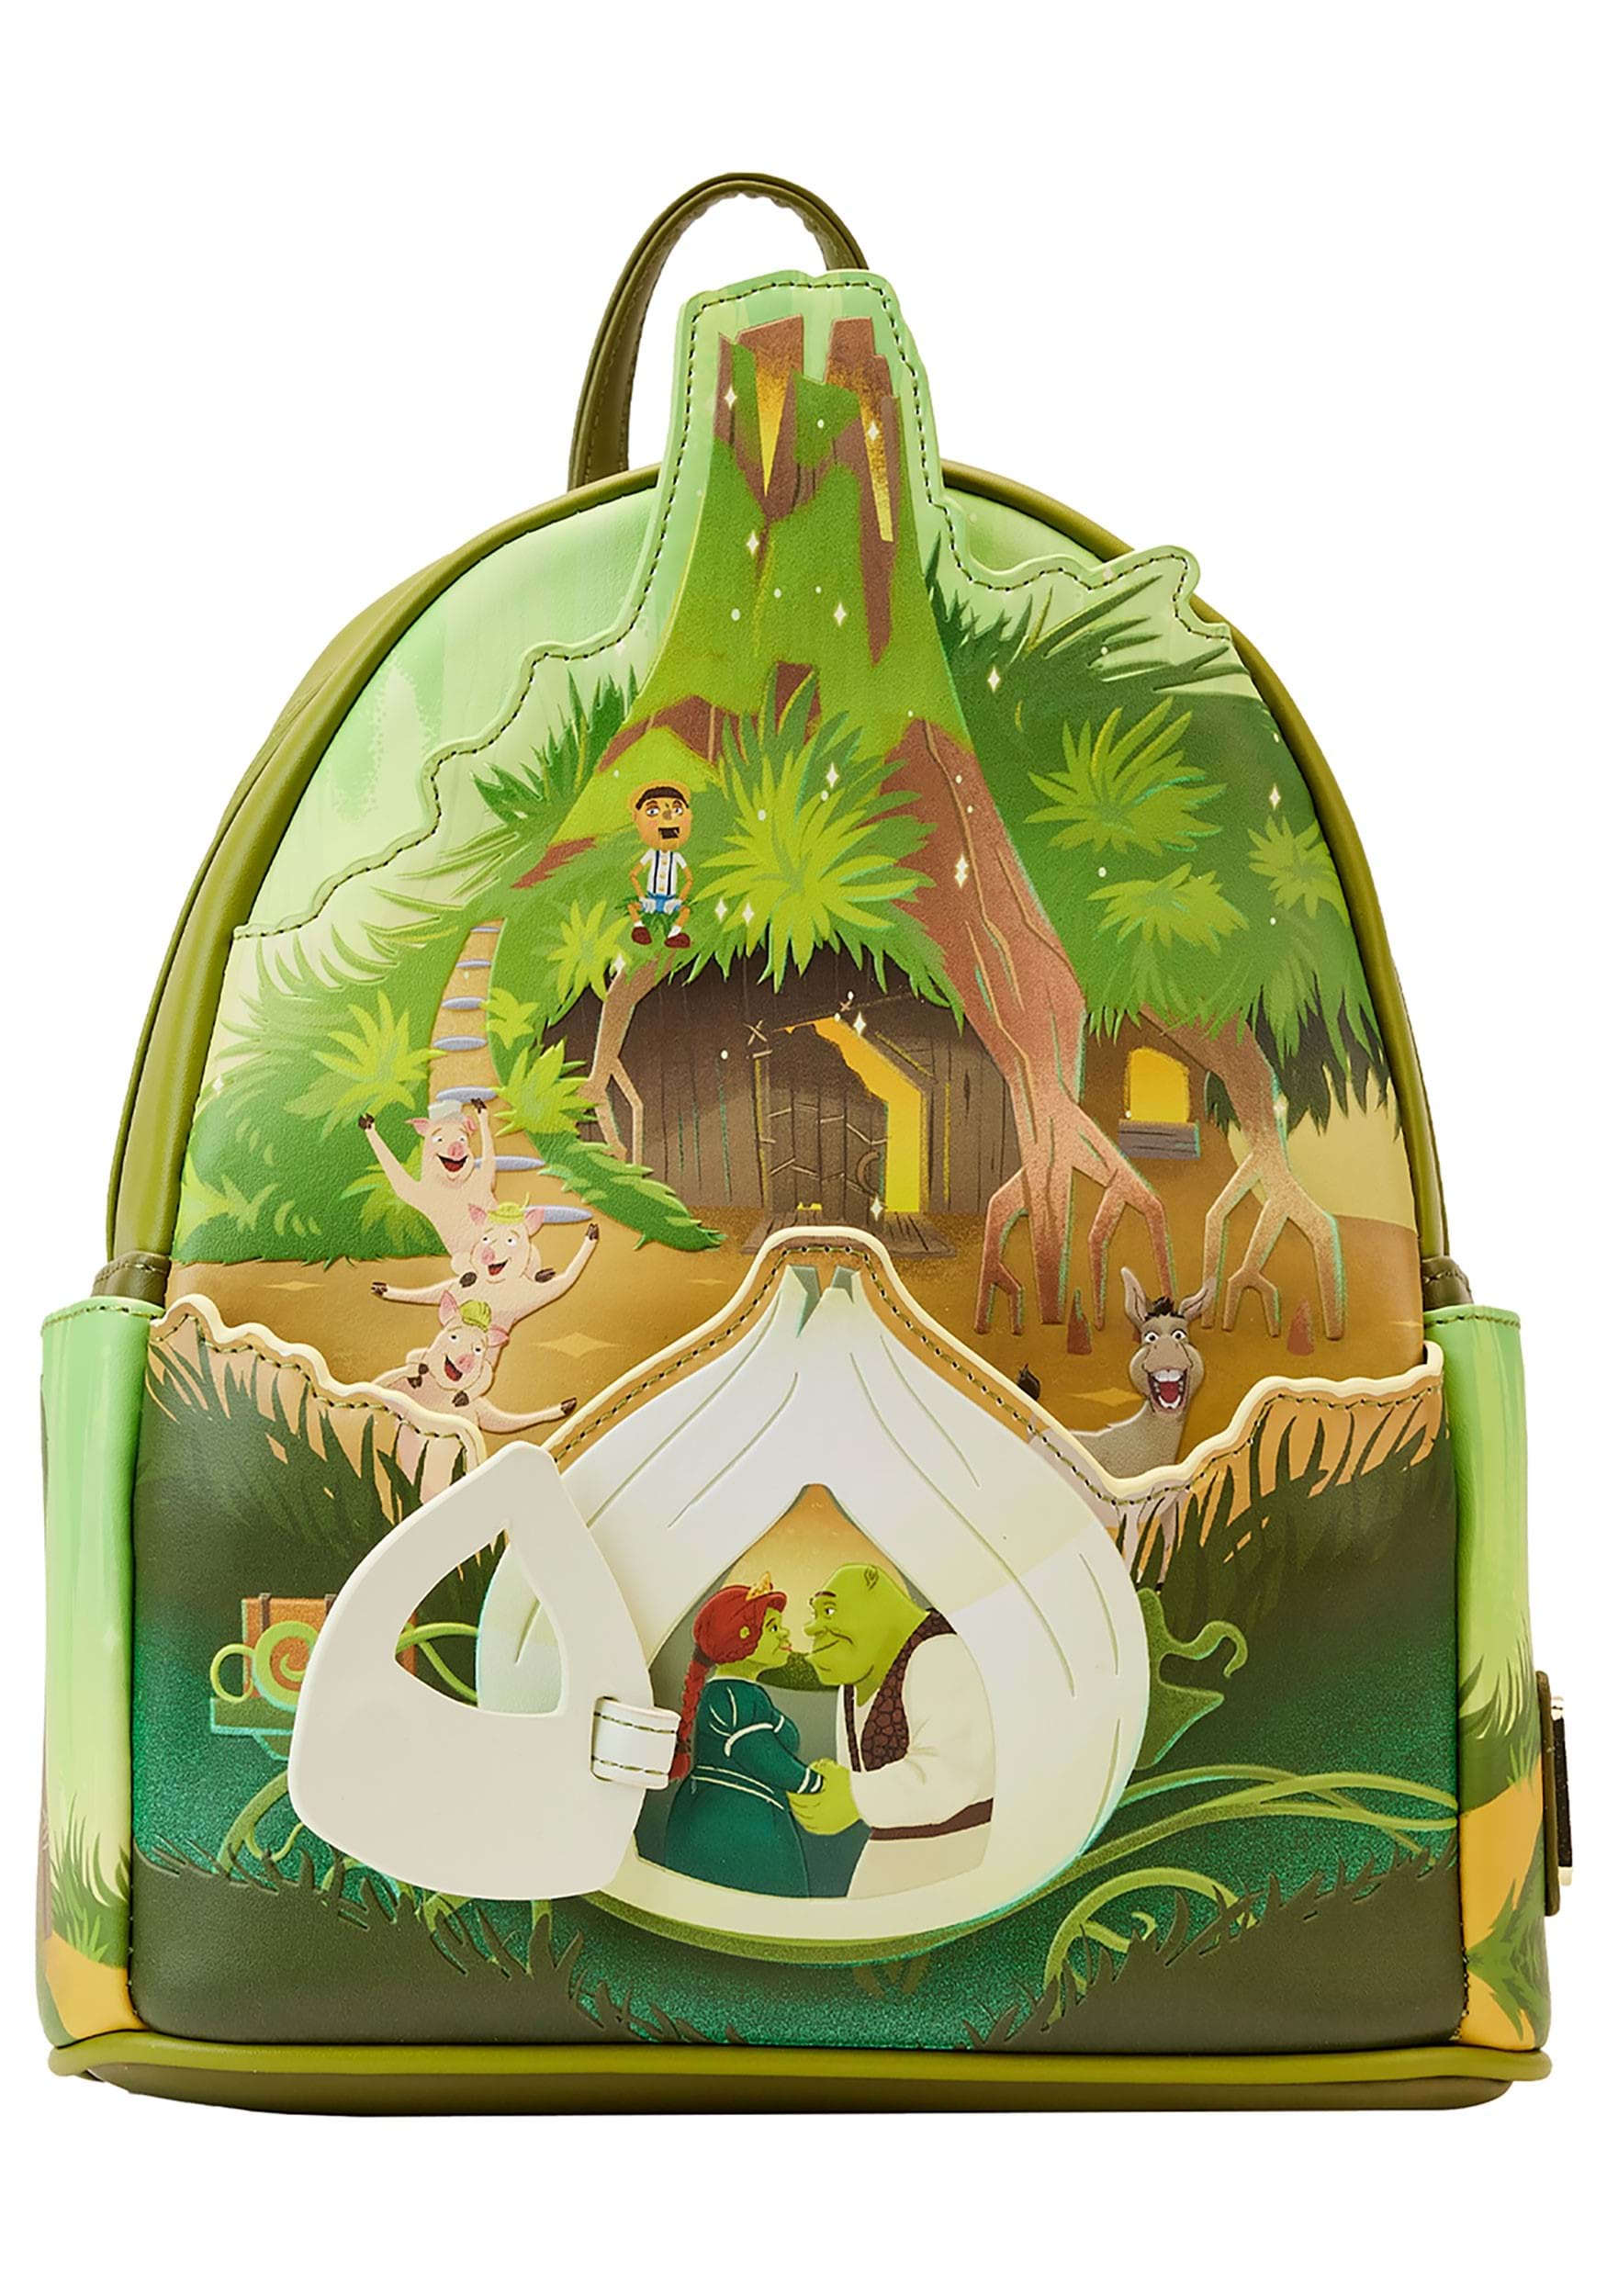 Dreamworks Shrek Happily Ever After Mini Backpack by Loungefly